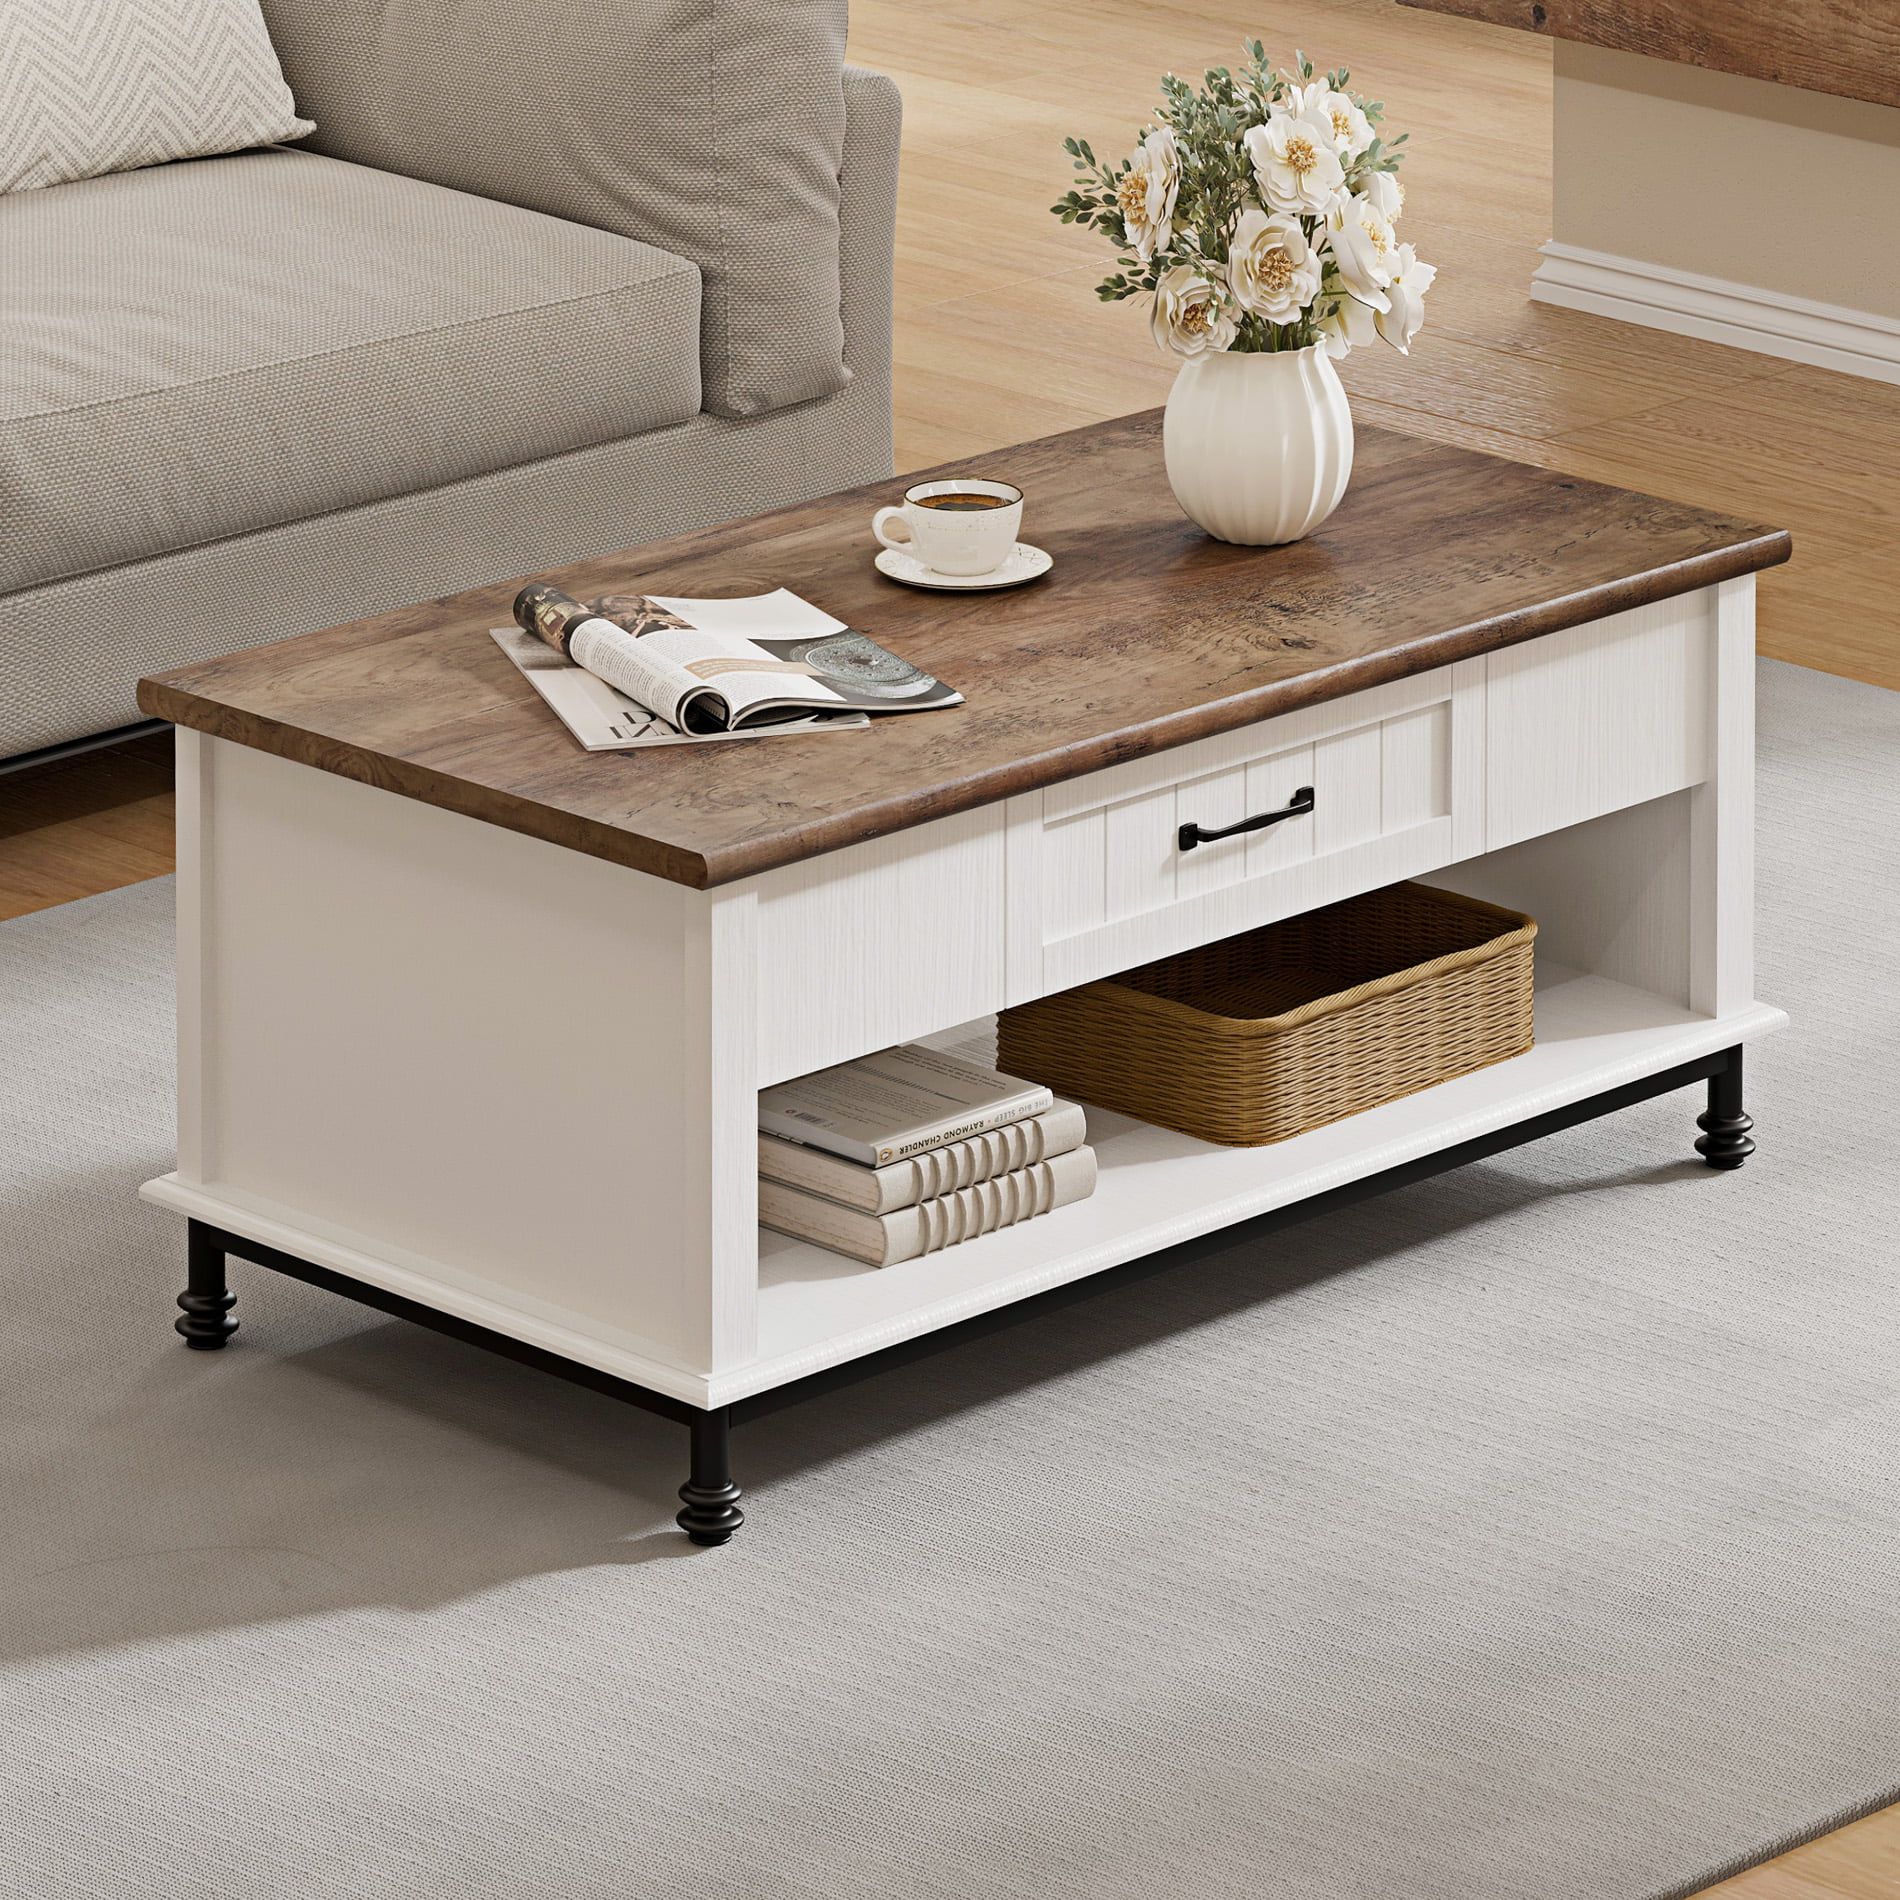 Wampat Farmhouse Wood Coffee Table With Storage, White/oak – Walmart With Regard To Off White Wood Coffee Tables (View 6 of 15)